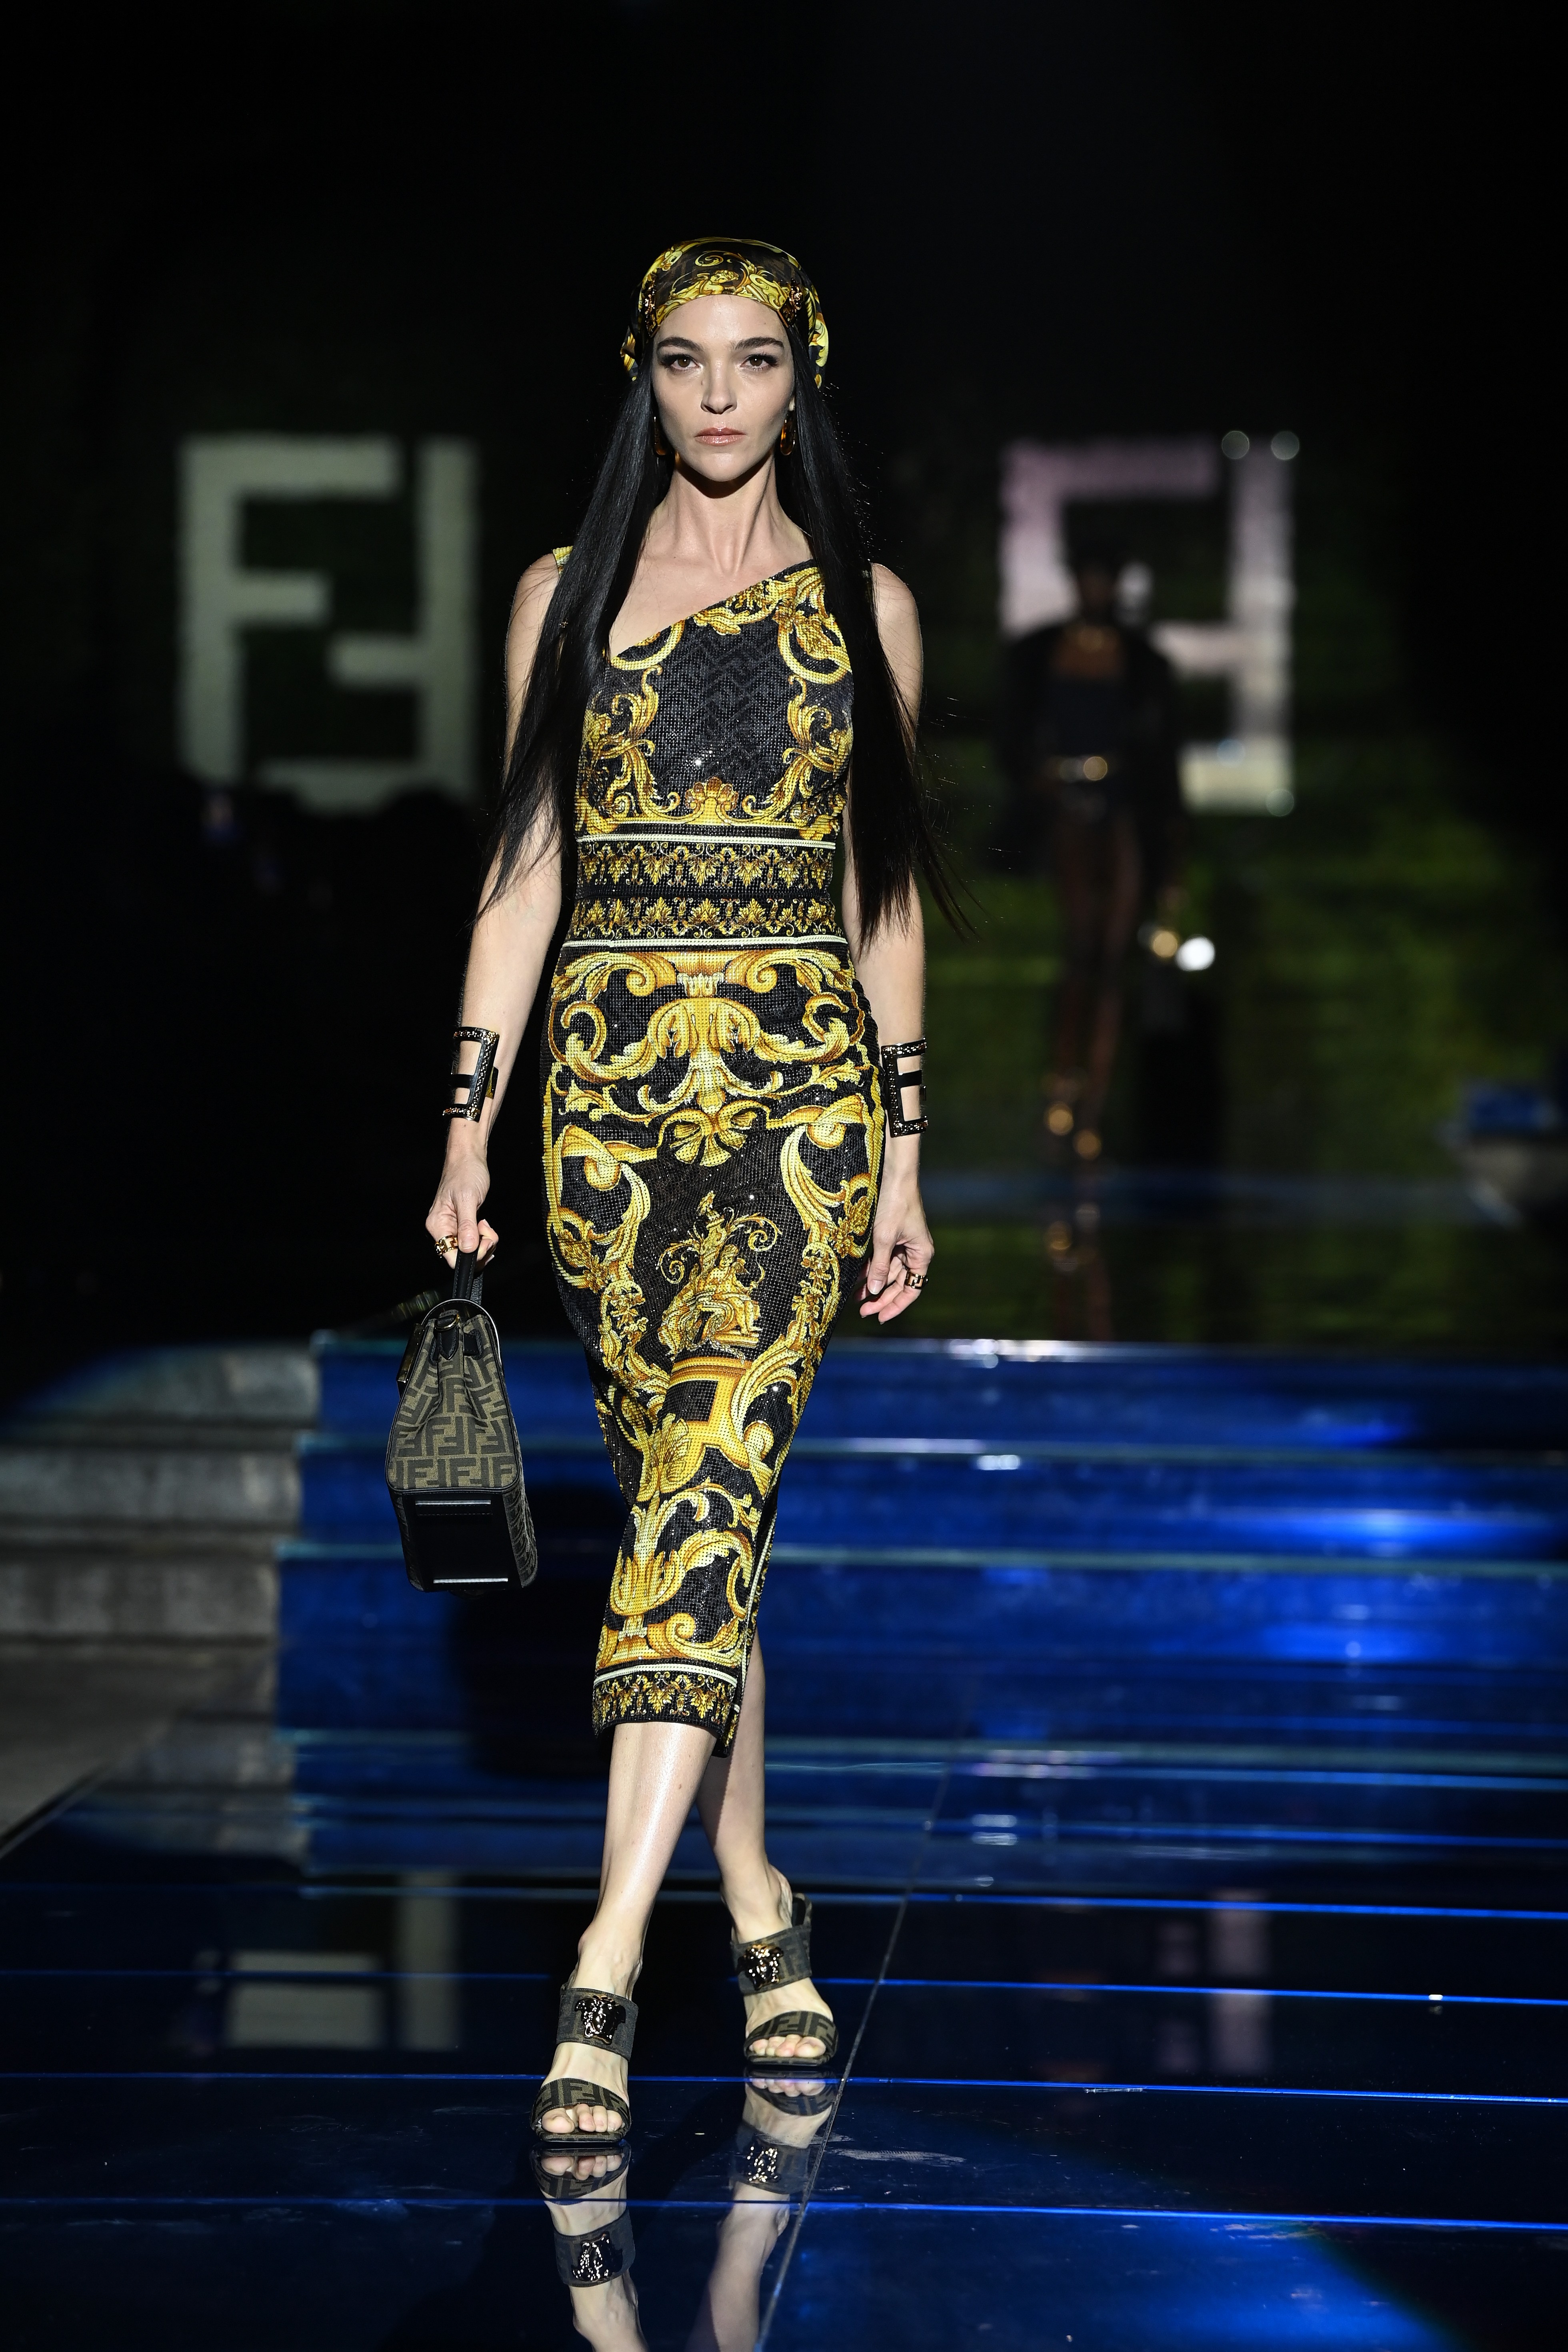 MILAN, ITALY - SEPTEMBER 26: Maria Carla Boscono walks the runway at the Versace special event during the Milan Fashion Week - Spring / Summer 2022 on September 26, 2021 in Milan, Italy. (Photo by Daniele Venturelli/Daniele Venturelli / Getty Images ) (Foto: Daniele Venturelli / Getty Image)